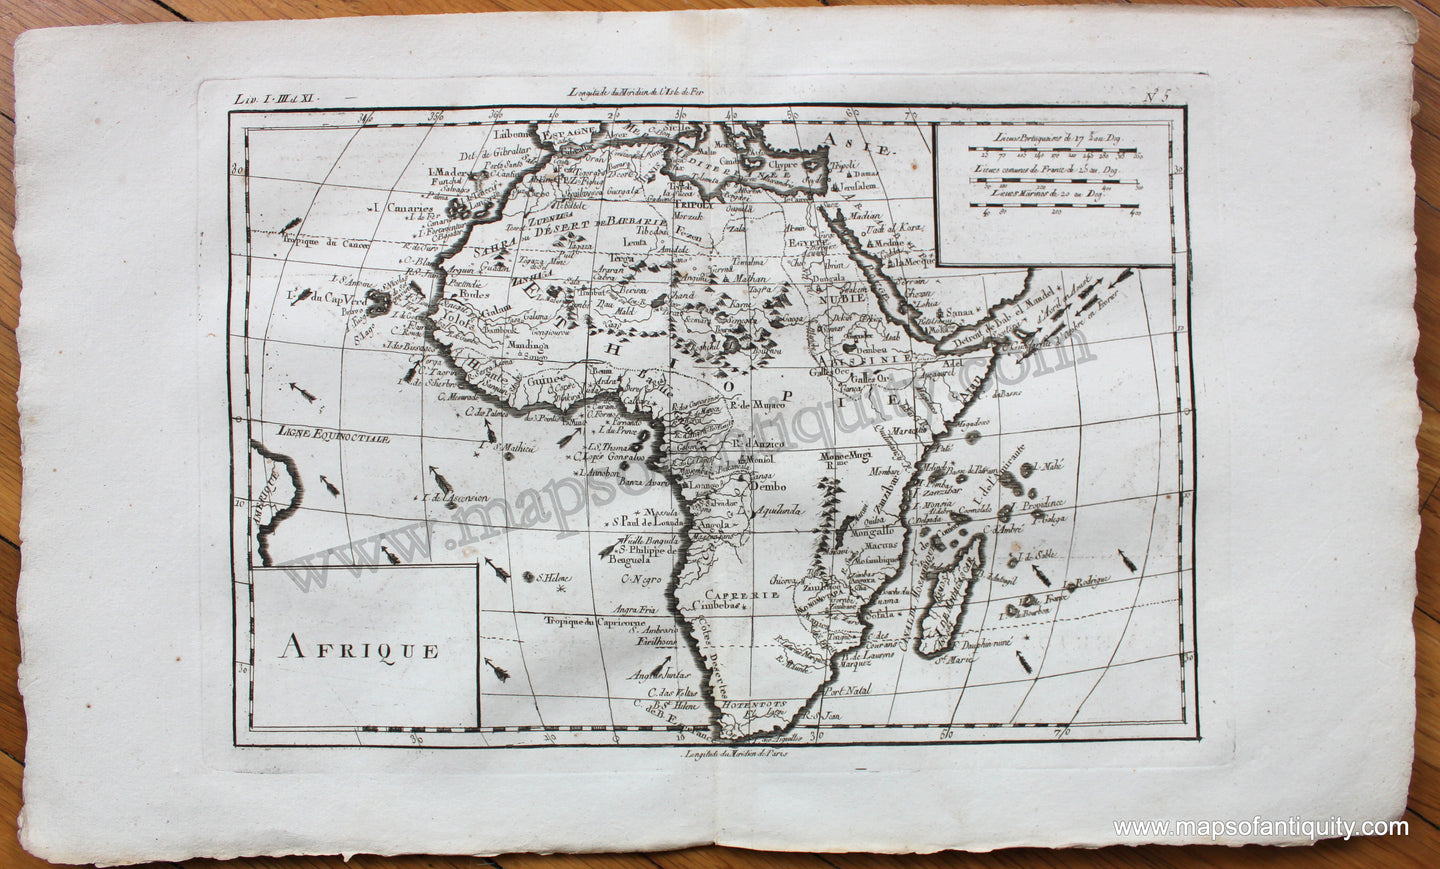 Antique-Map-Afrique-Africa-Raynal-Bonne-1780-1780s-1700s-Late-18th-Century-Maps-of-Antiquity